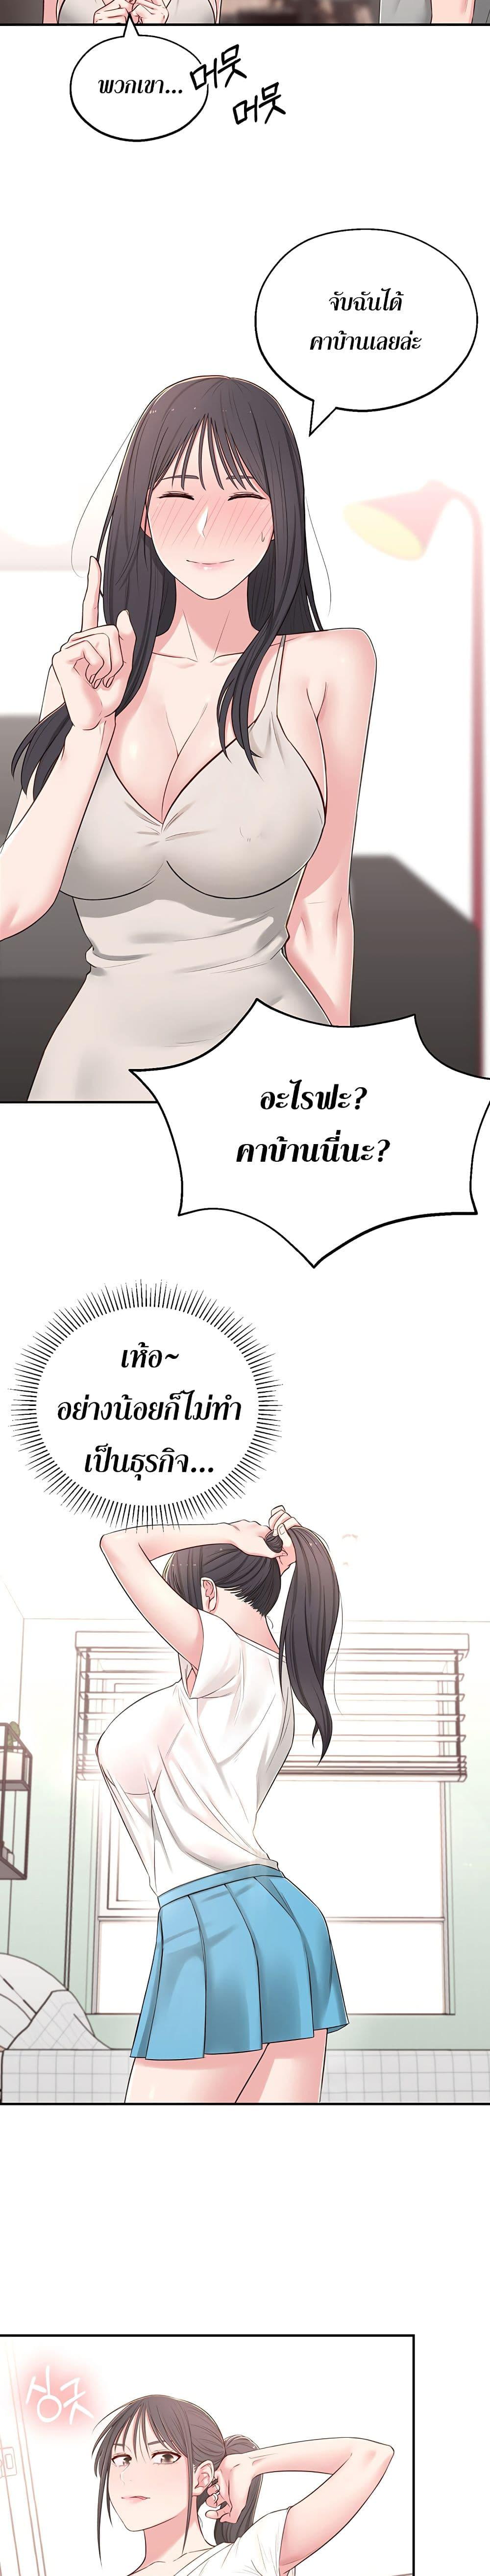 A Knowing Sister 5 ภาพ 23